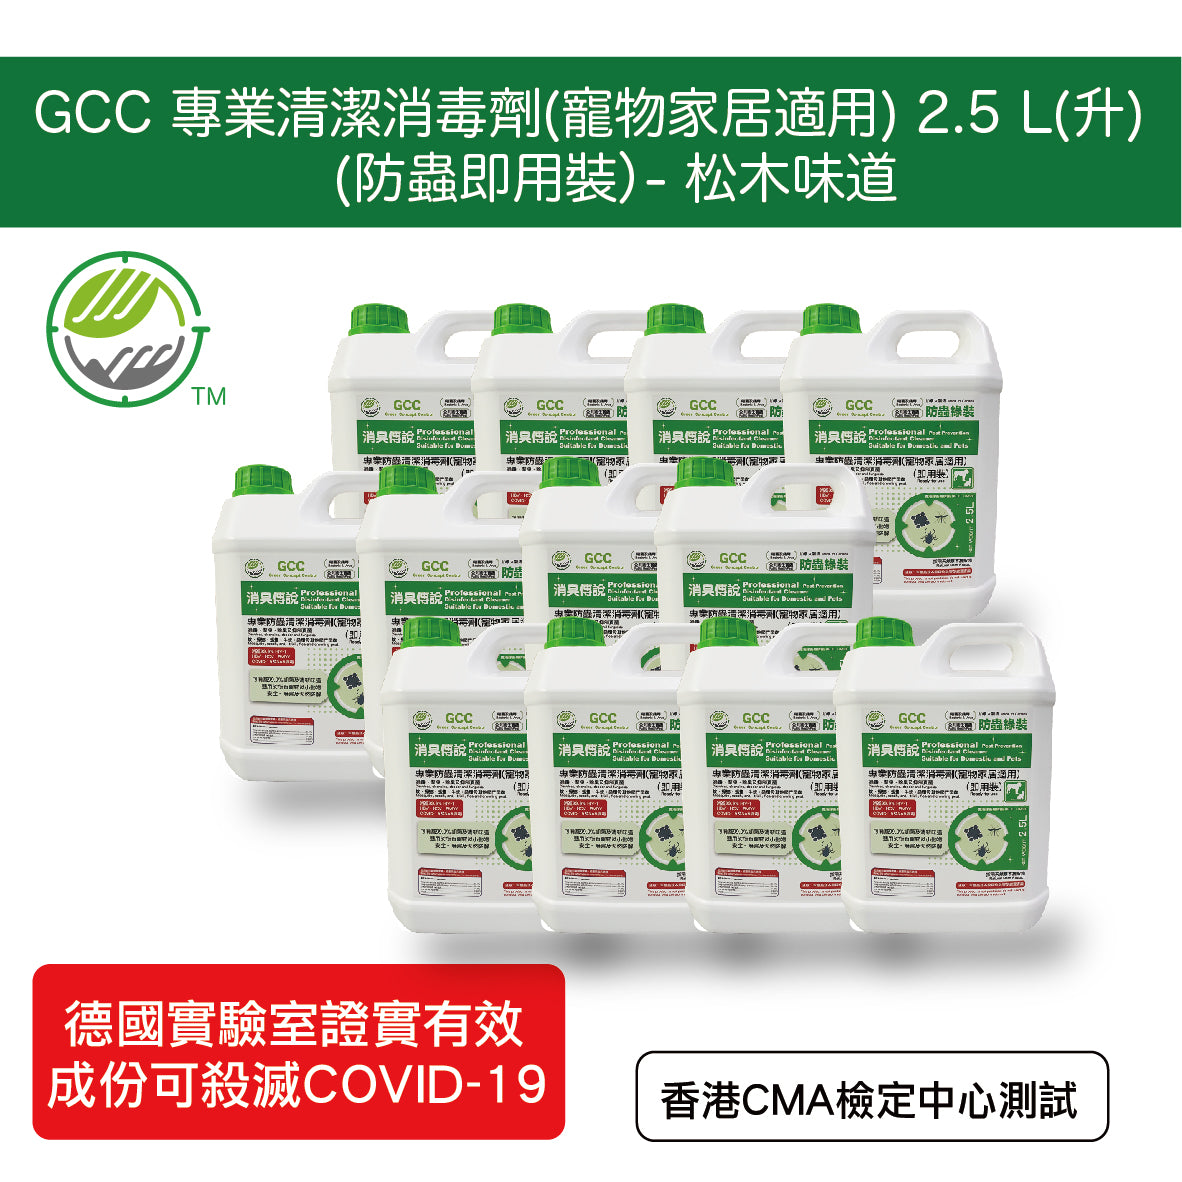 GCC Professional Disinfectant Cleaner ( Pest Safety ) Pest Prevention 2.5 L